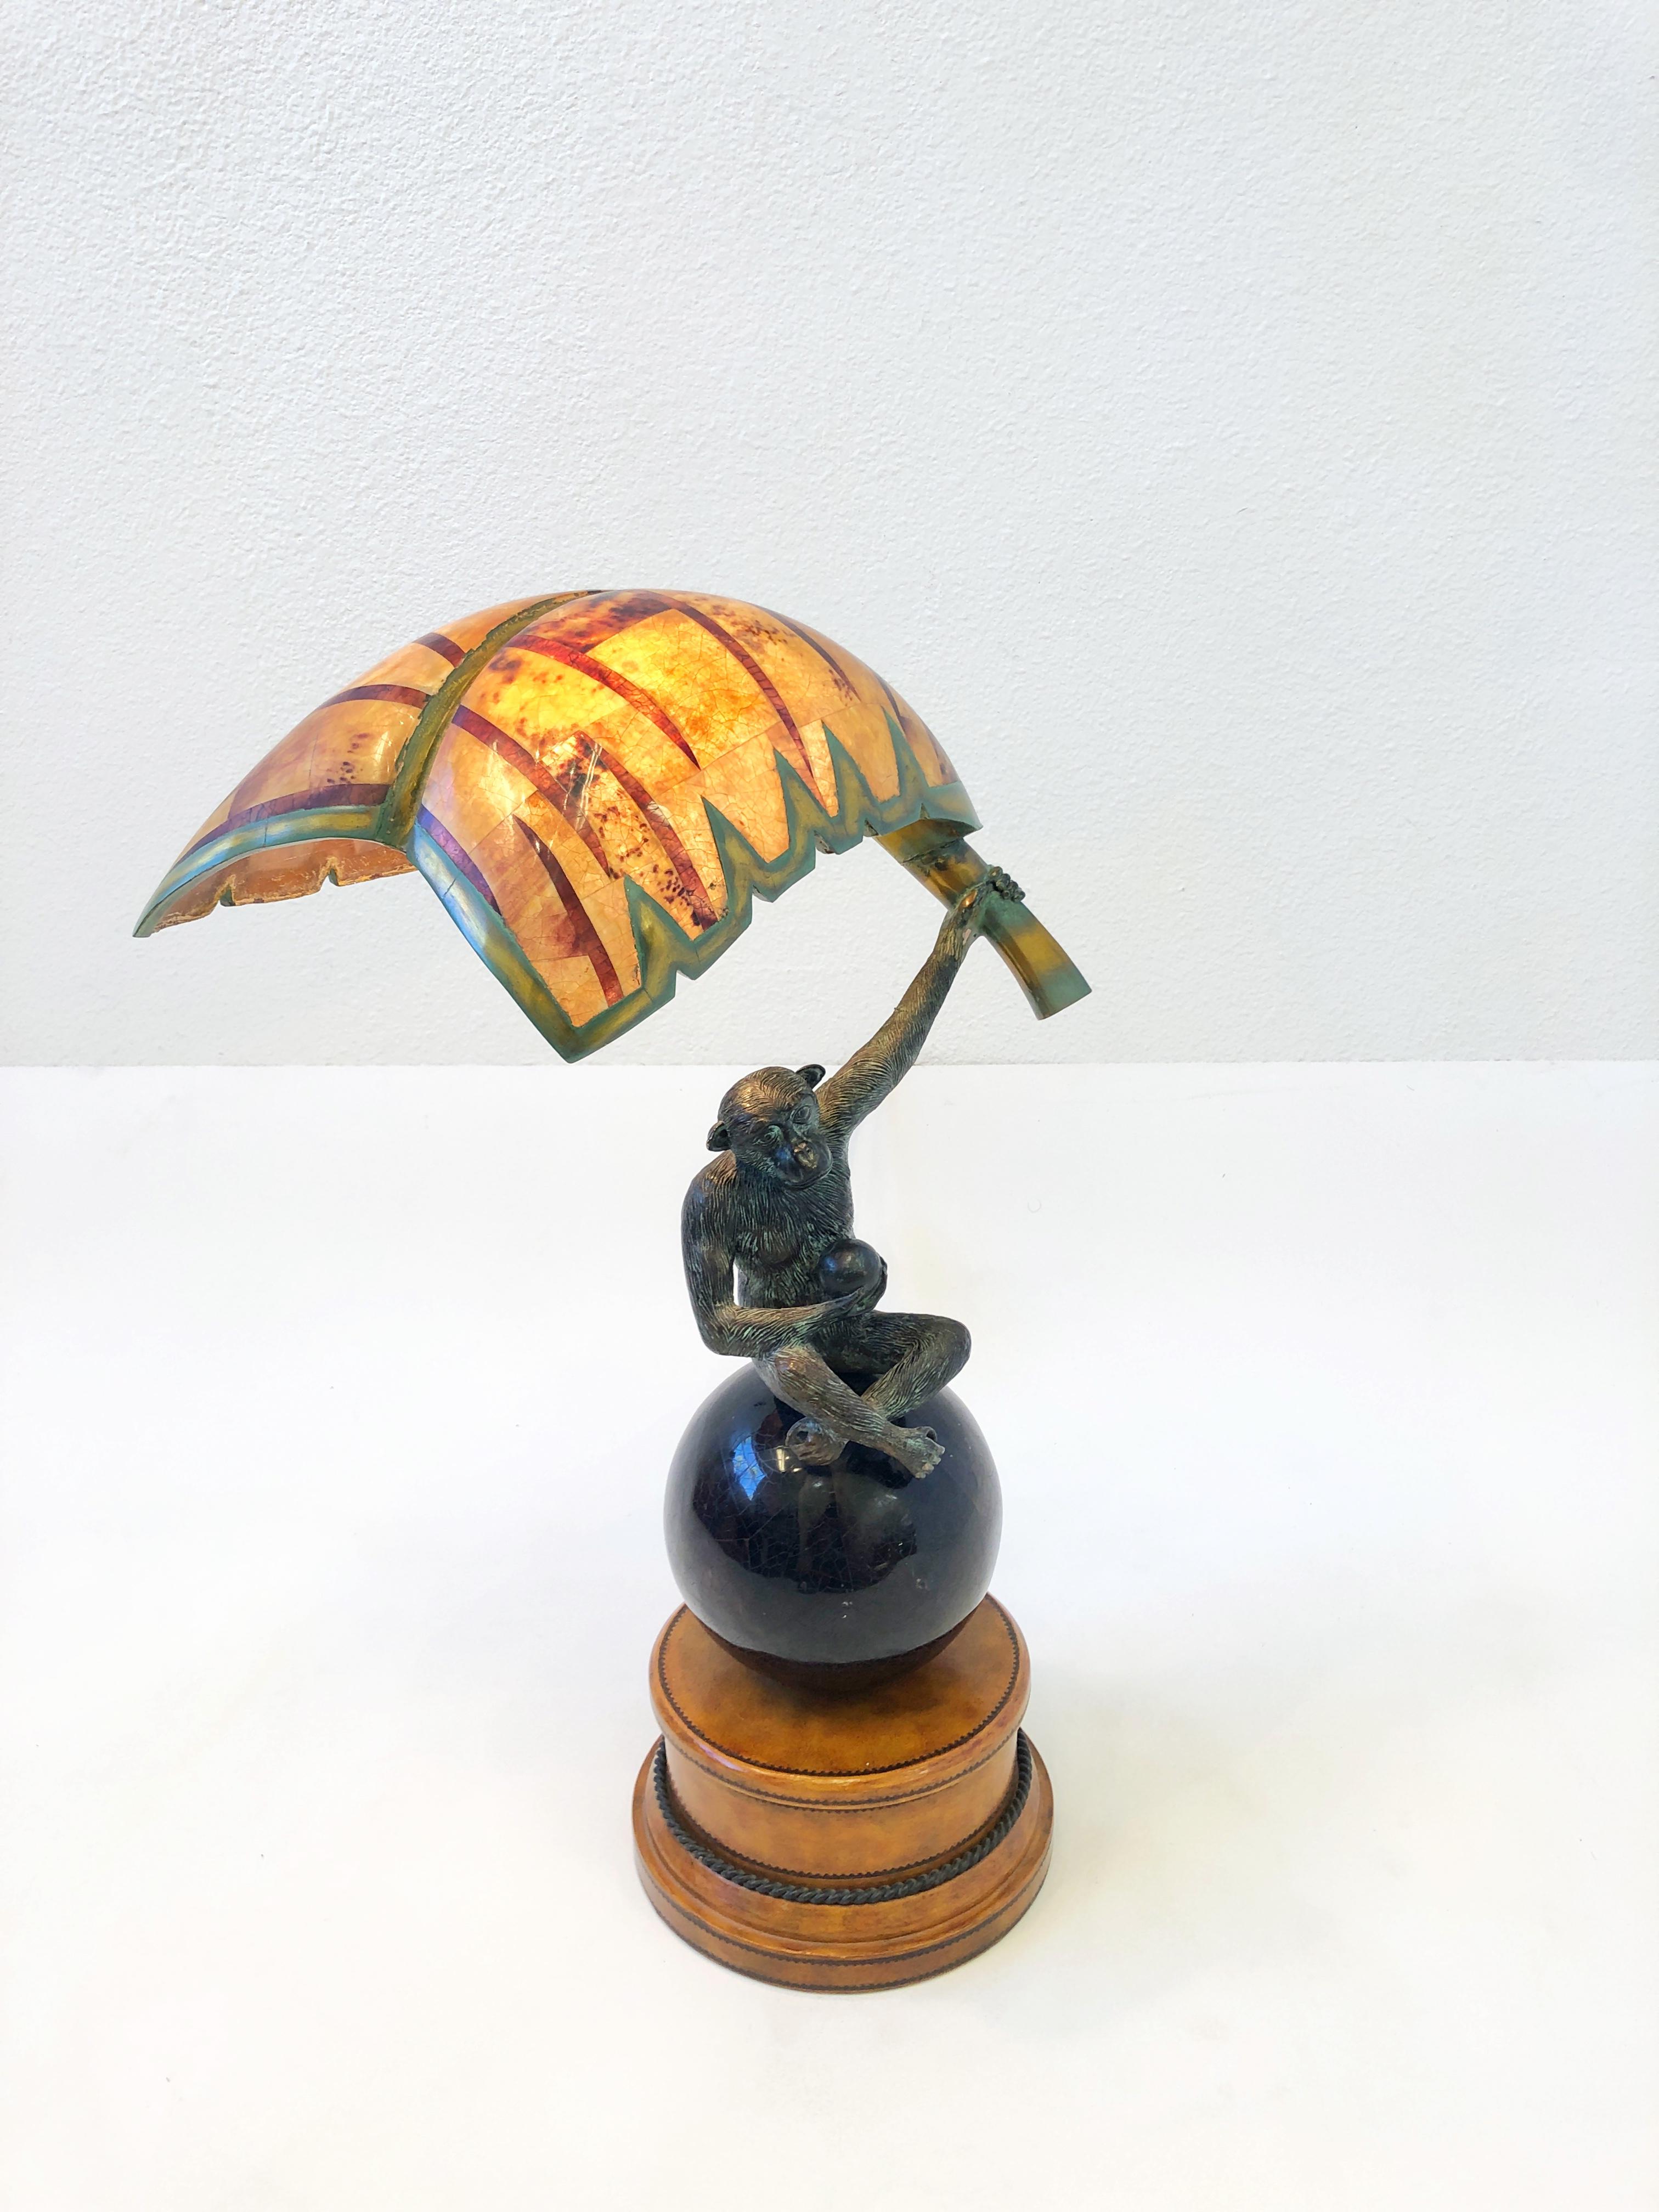 1980’s Bronze Monkey holding a ball and banana leaf on hands table lamp by Maitland Smith. 
Retains Maitland Smith label. 
It takes a 40w max candelabra size lightbulb.
Newly rewired with in line on/off switch.
Measurements: 15” Wide, 9” Deep,